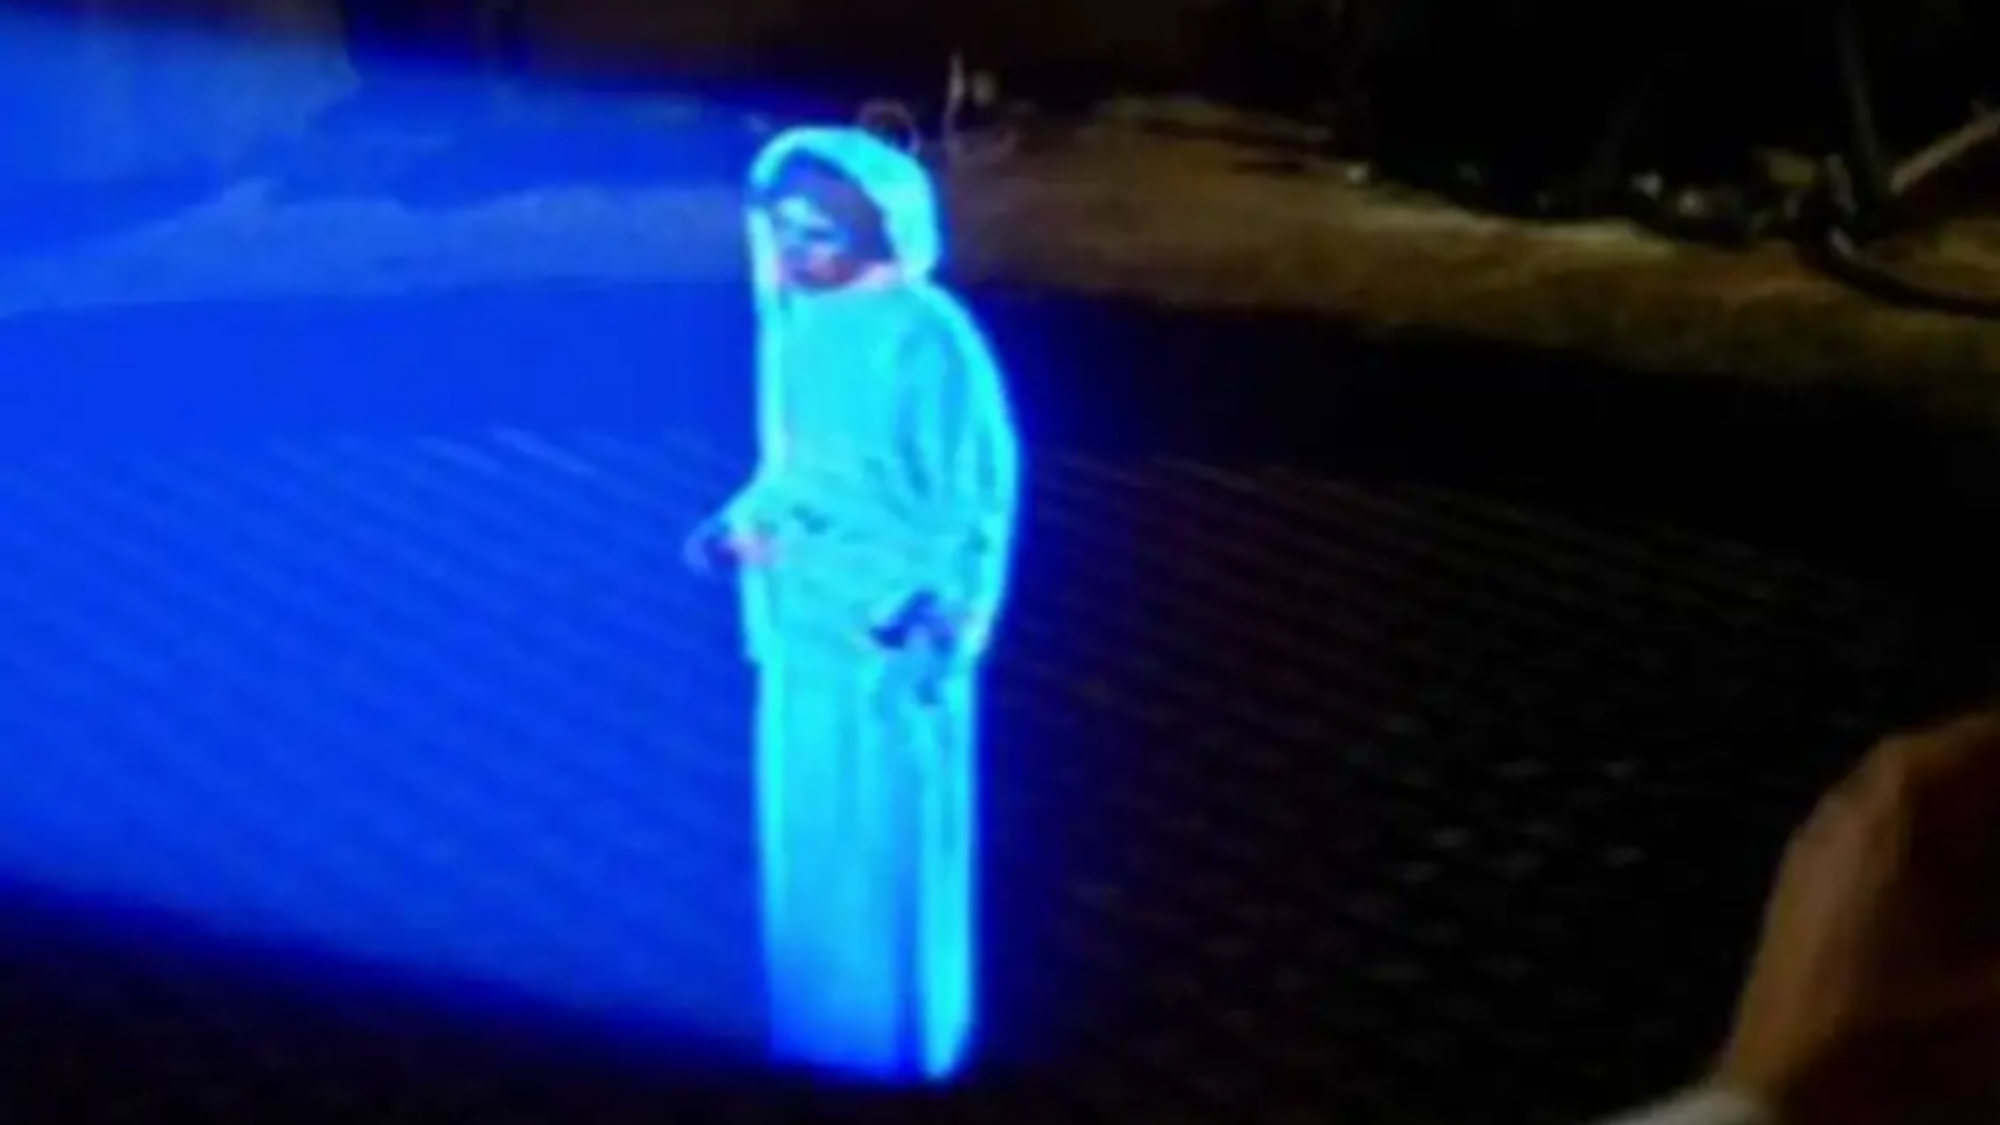 This new MIT tech gets us a step closer to 'Star Wars'-style holograms